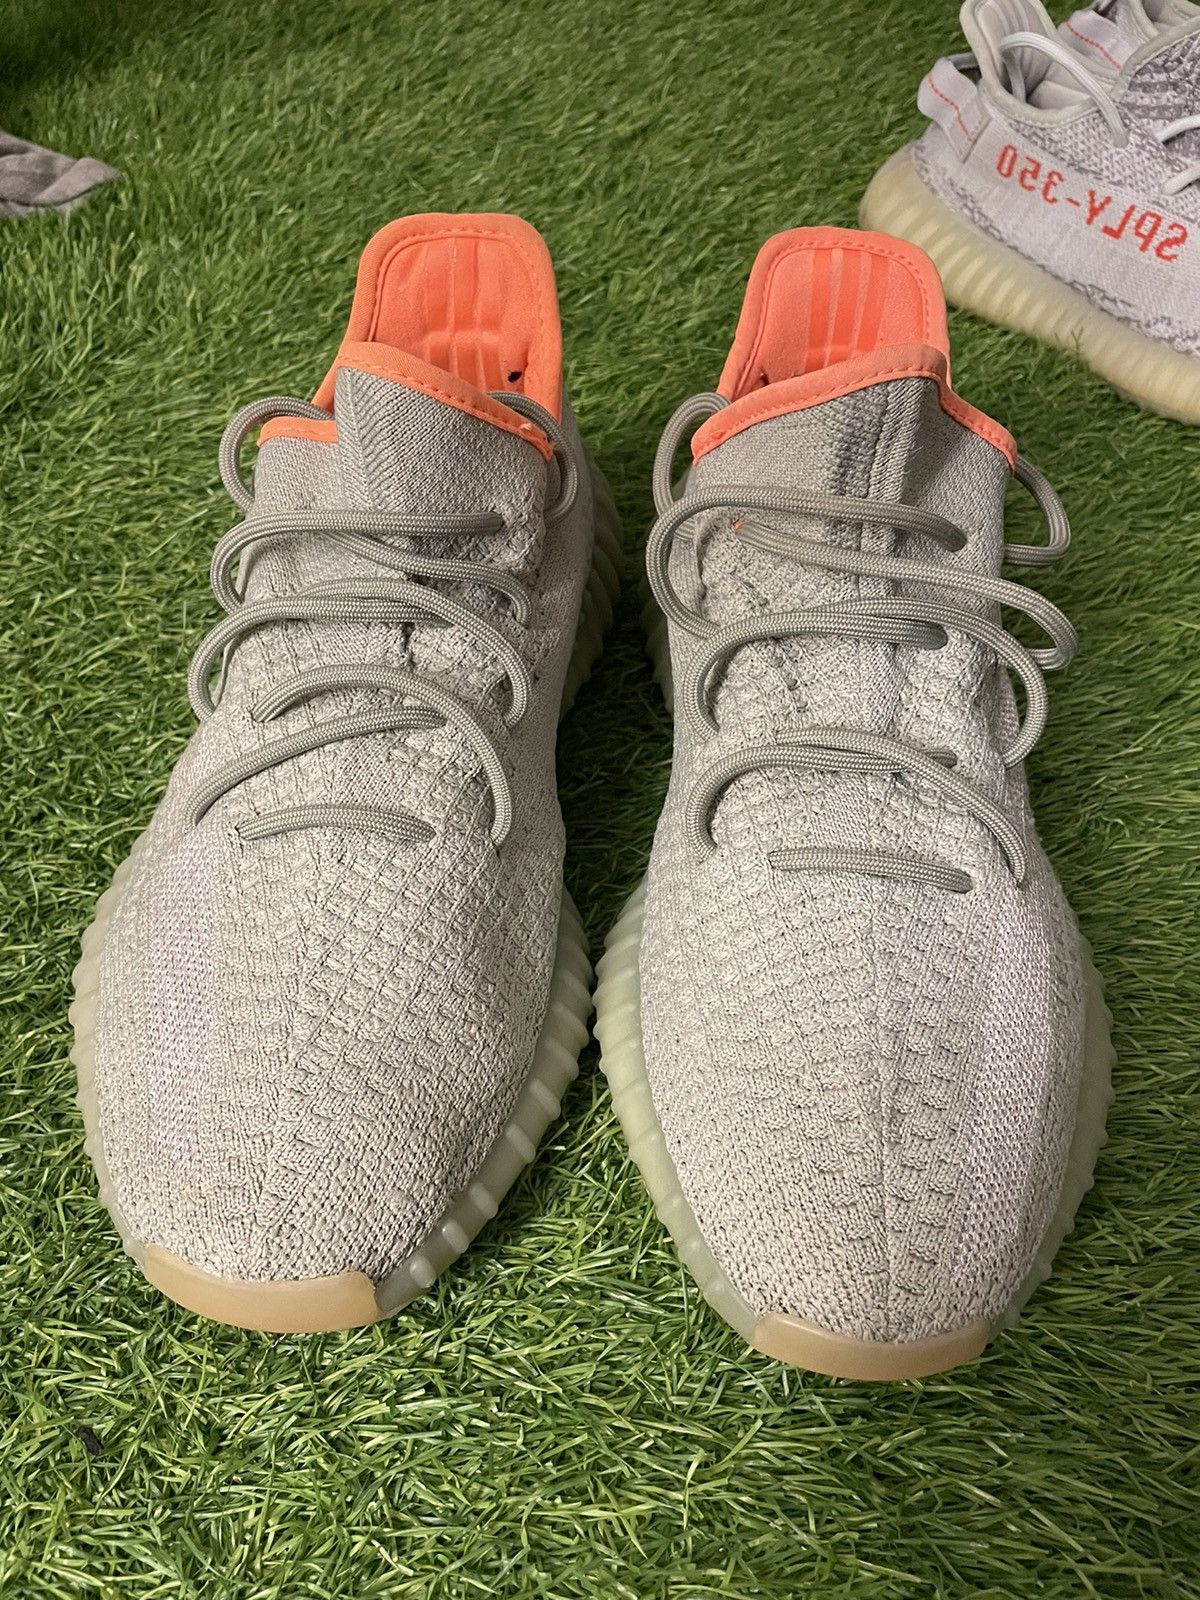 Adidas Yeezy Boost 350 V2 Desert Sage Sneakers Size US 10 / EU 43 - 8 Preview